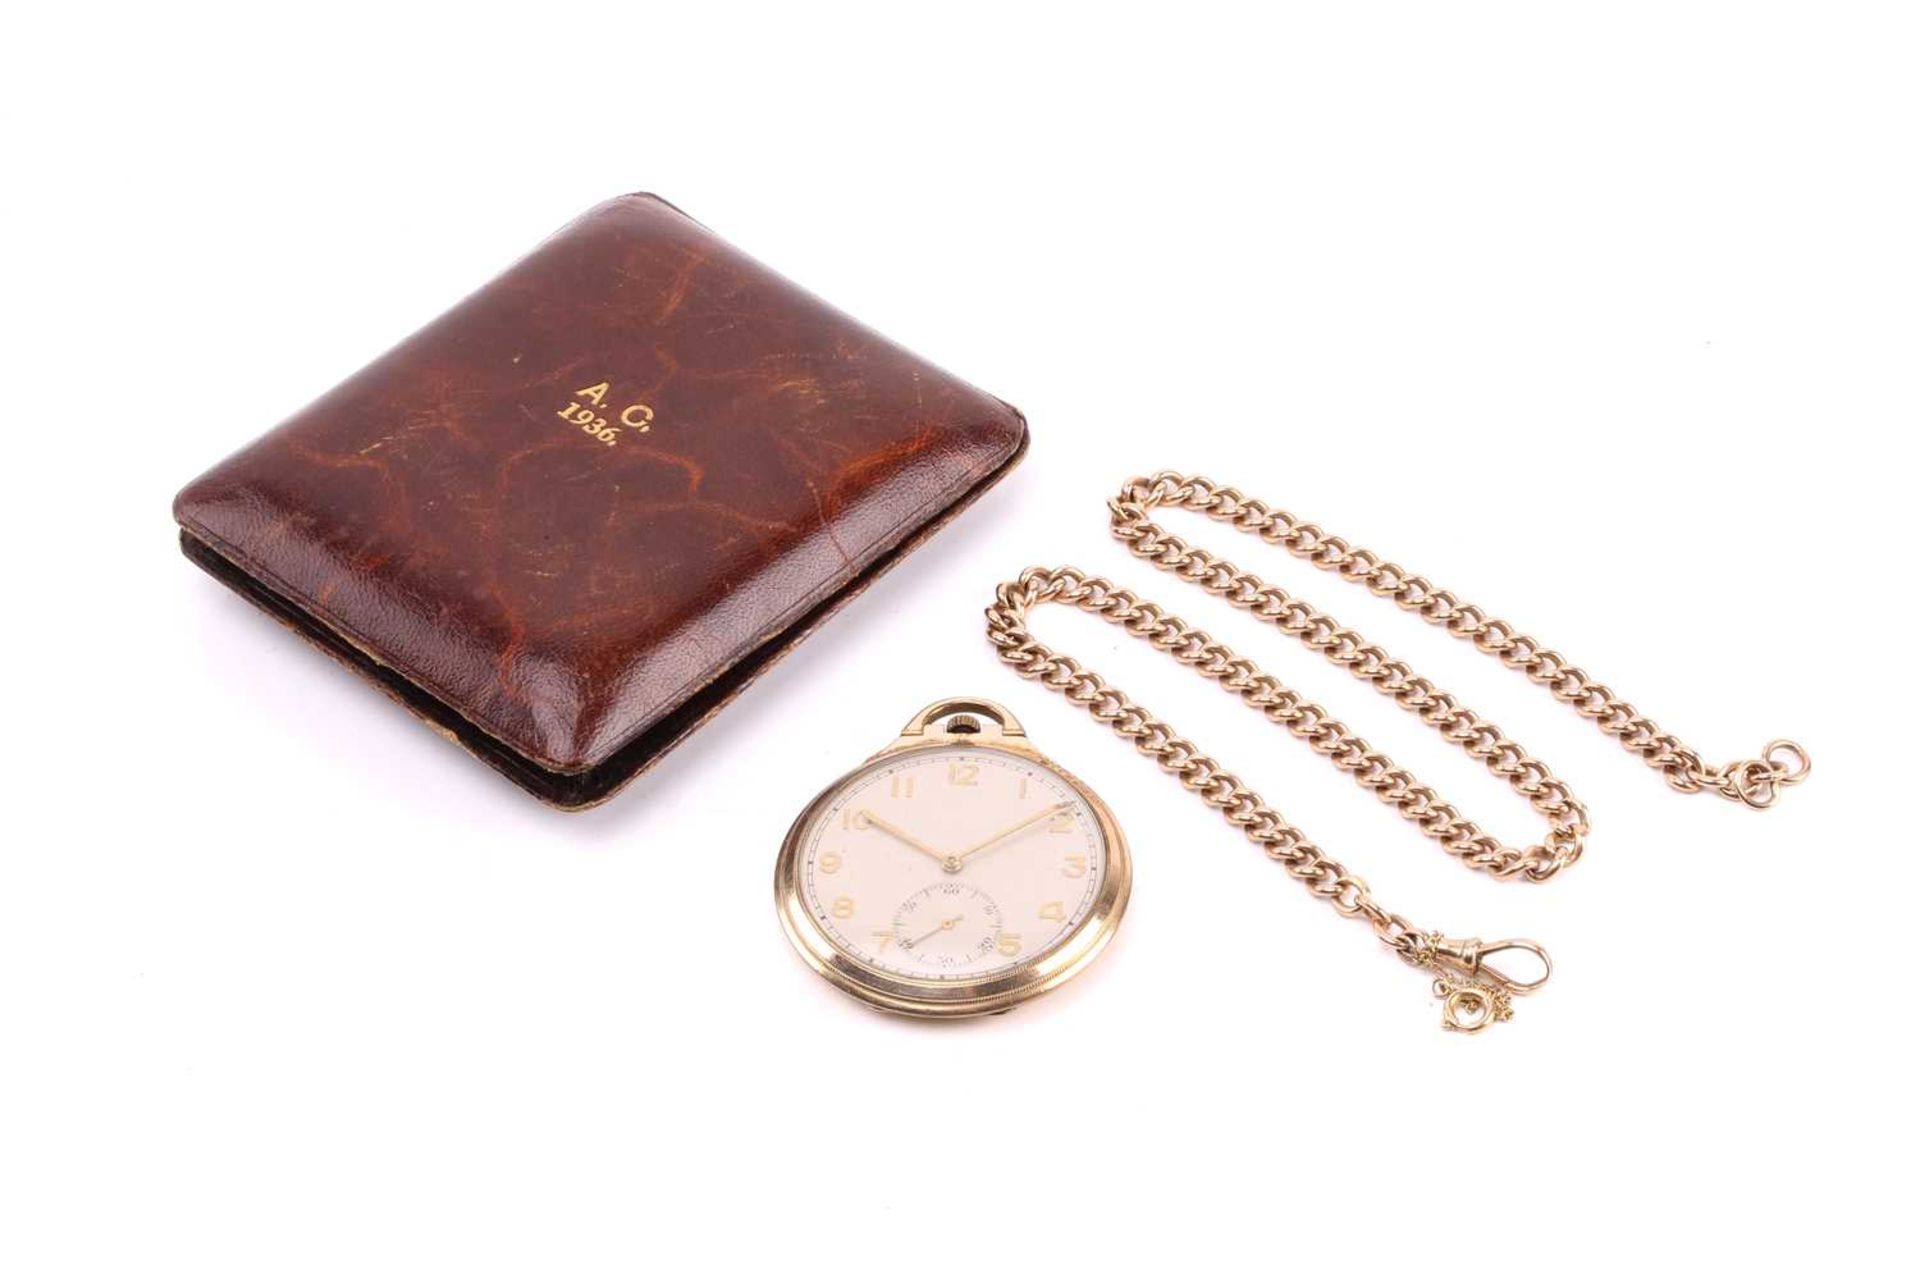 A 9ct watch chain and gold plated pocket watch in leather case, featuring a keyless wound gold